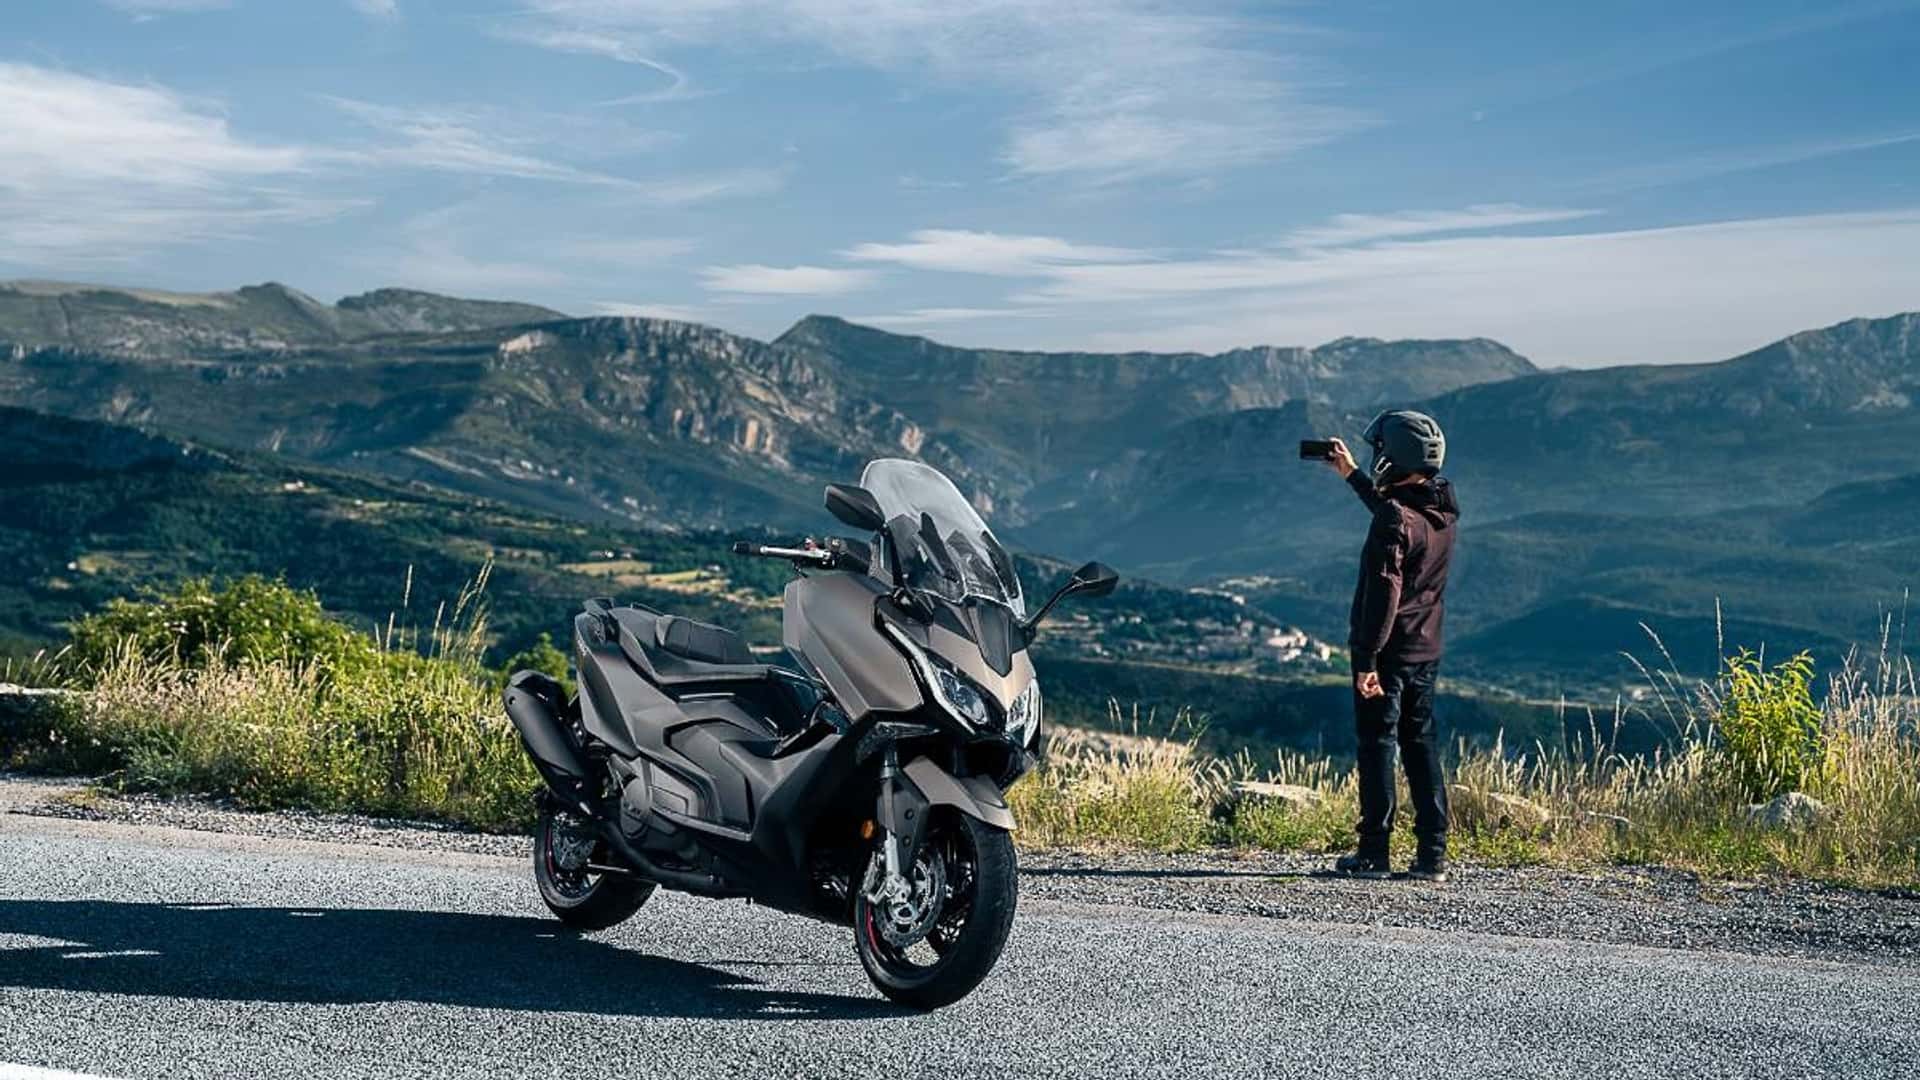 KYMCO AK 550 2023 gets a new look with the Premium version, taking on the Yamaha TMAX KYMCO AK 550 Premium 2023 (1).jpg